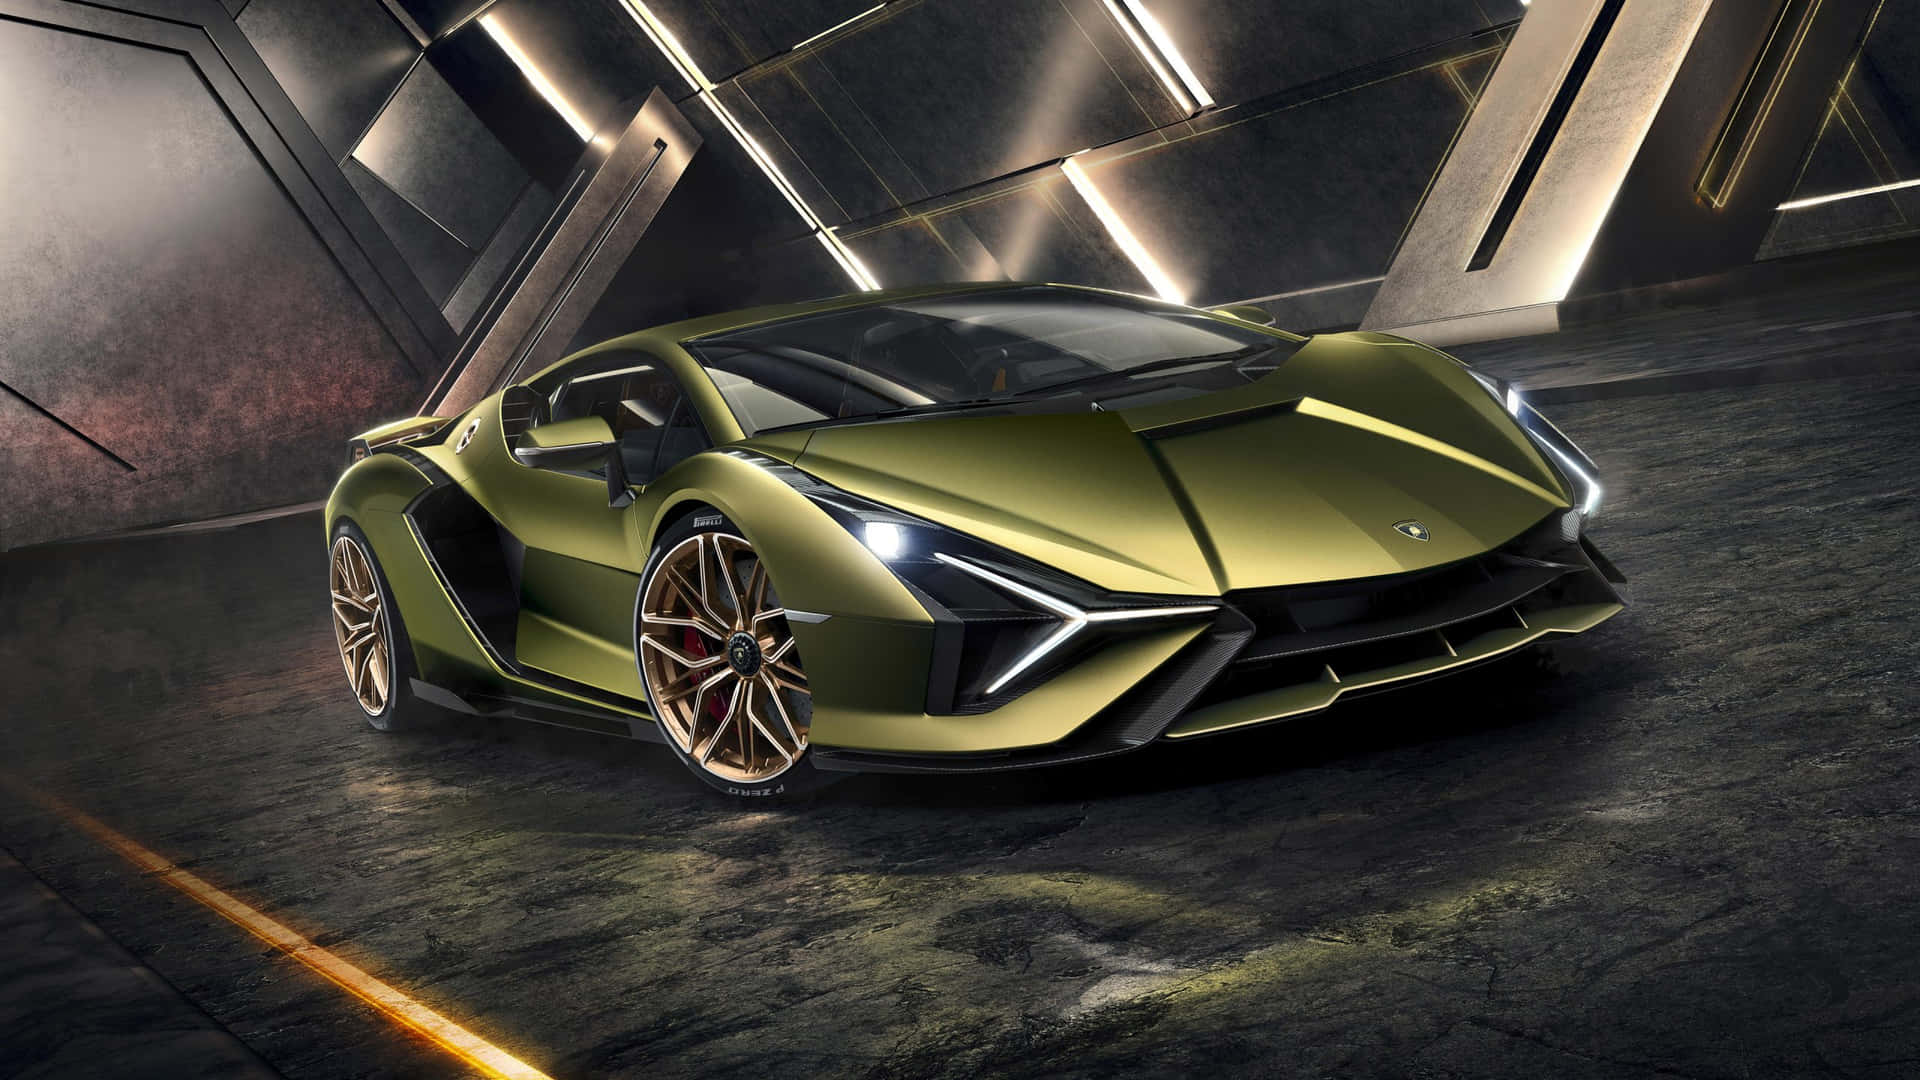 Experience the power of a cool Lamborghini